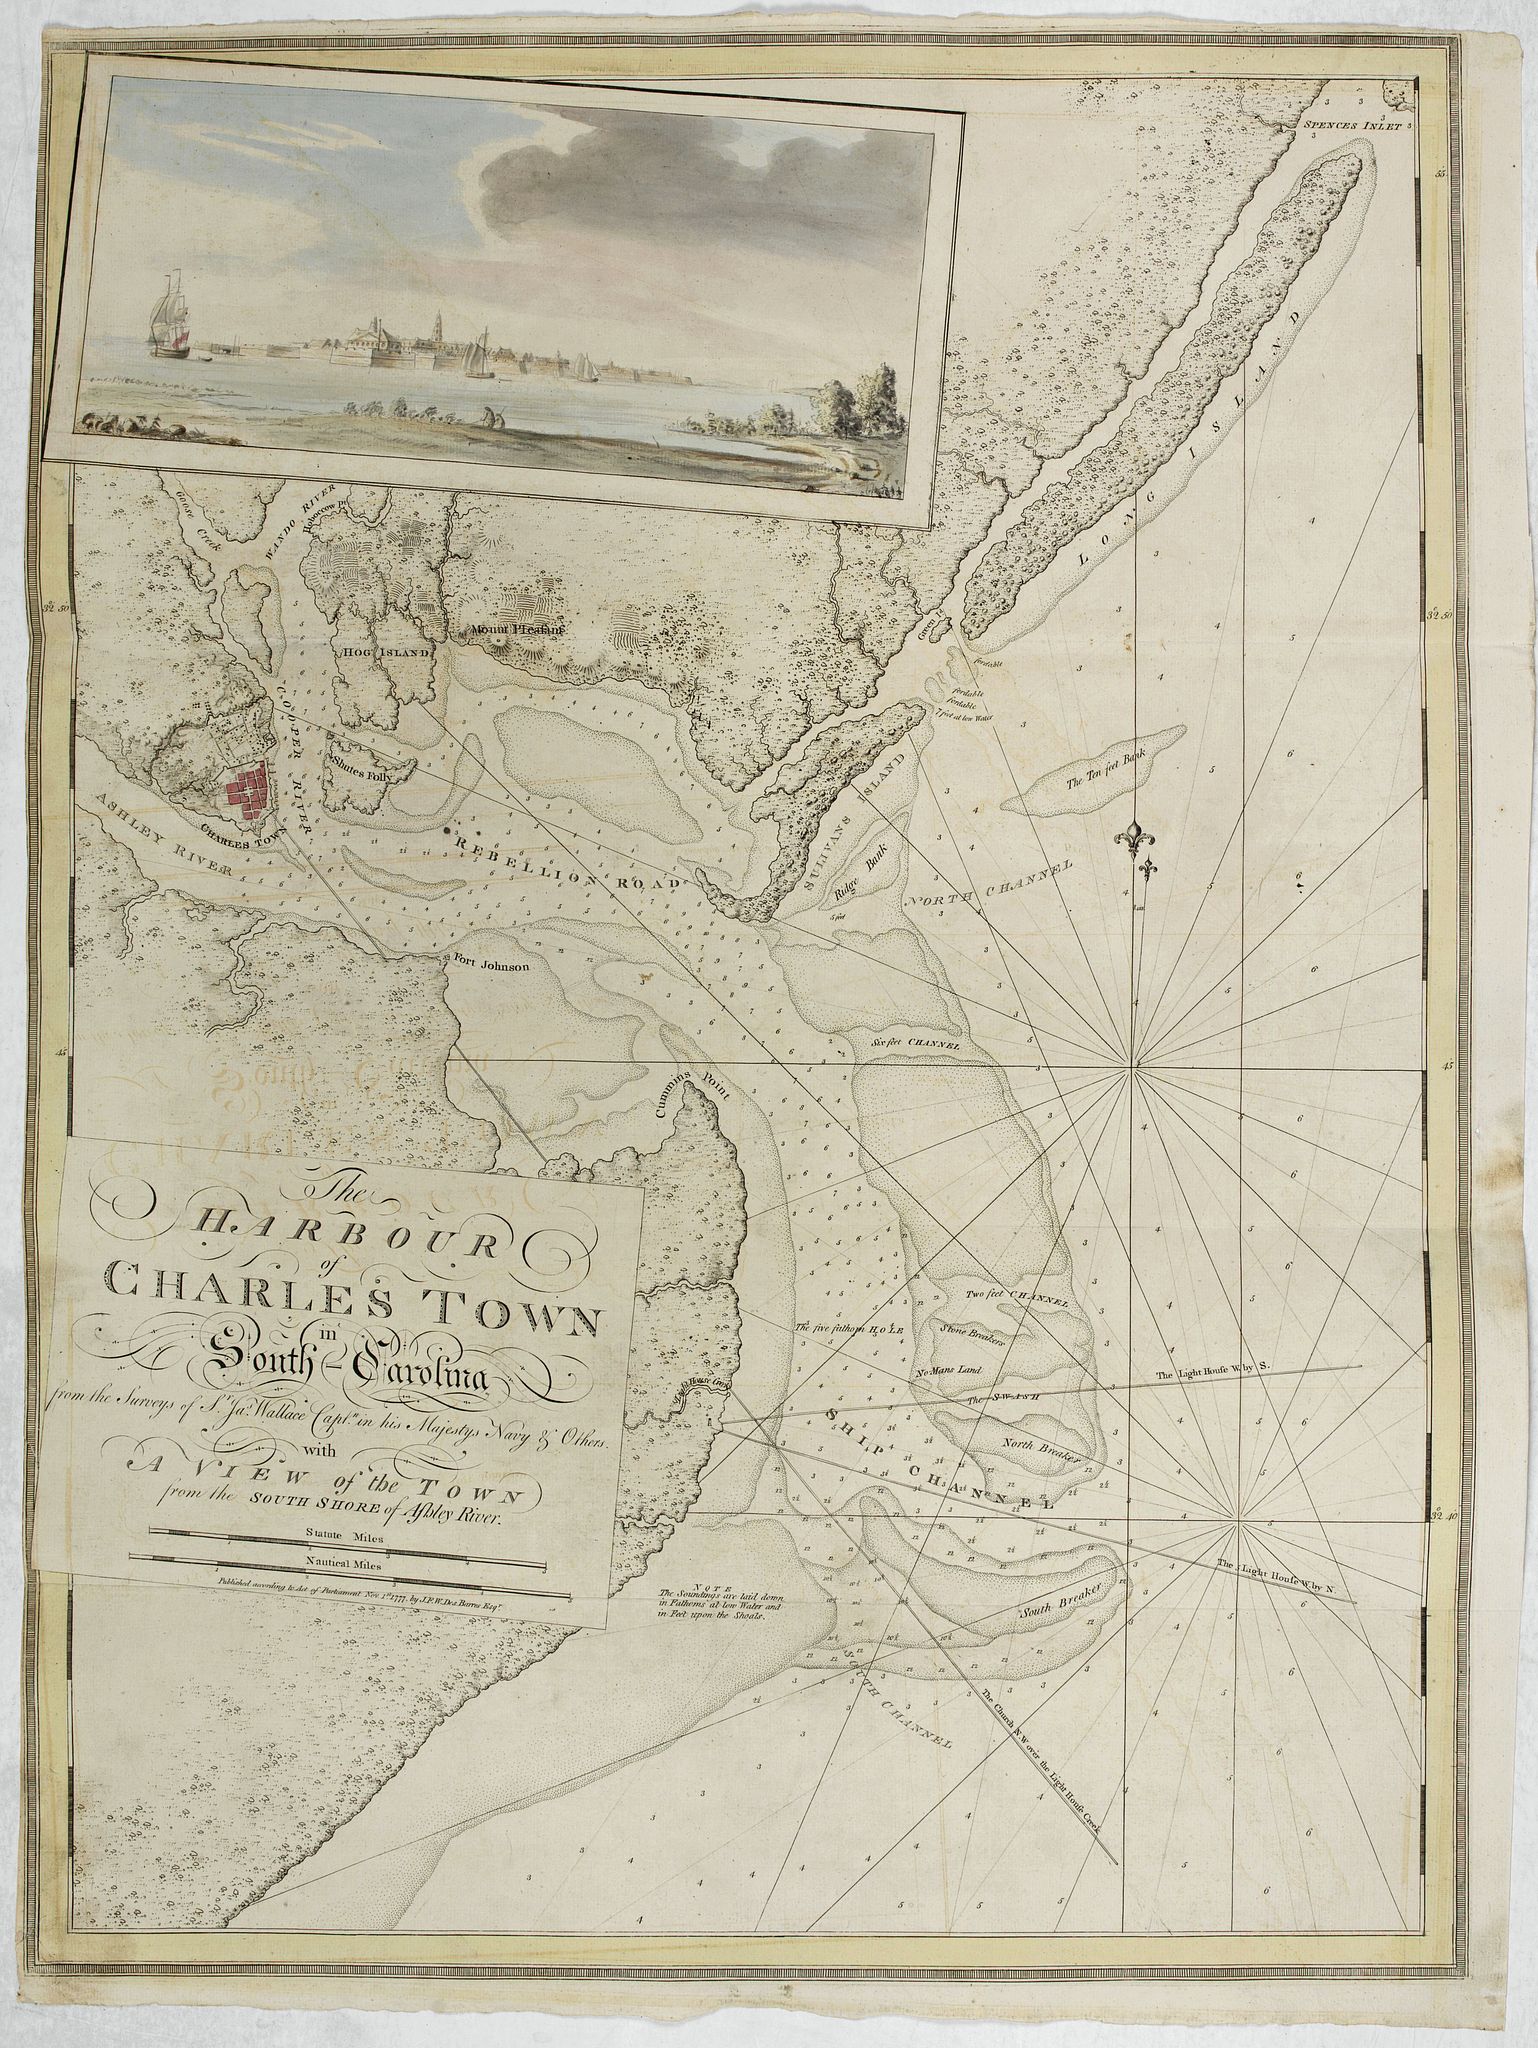 The Harbour of Charles Town in South-Carolina from the Surveys of Sr. Jas. Wallace Captn in His Majestys Navy & Others with a View of the Town from the South Shore of Ashley River. Published ... Nov. 1st 1777 by J.F.W. Des Barres Esqr.